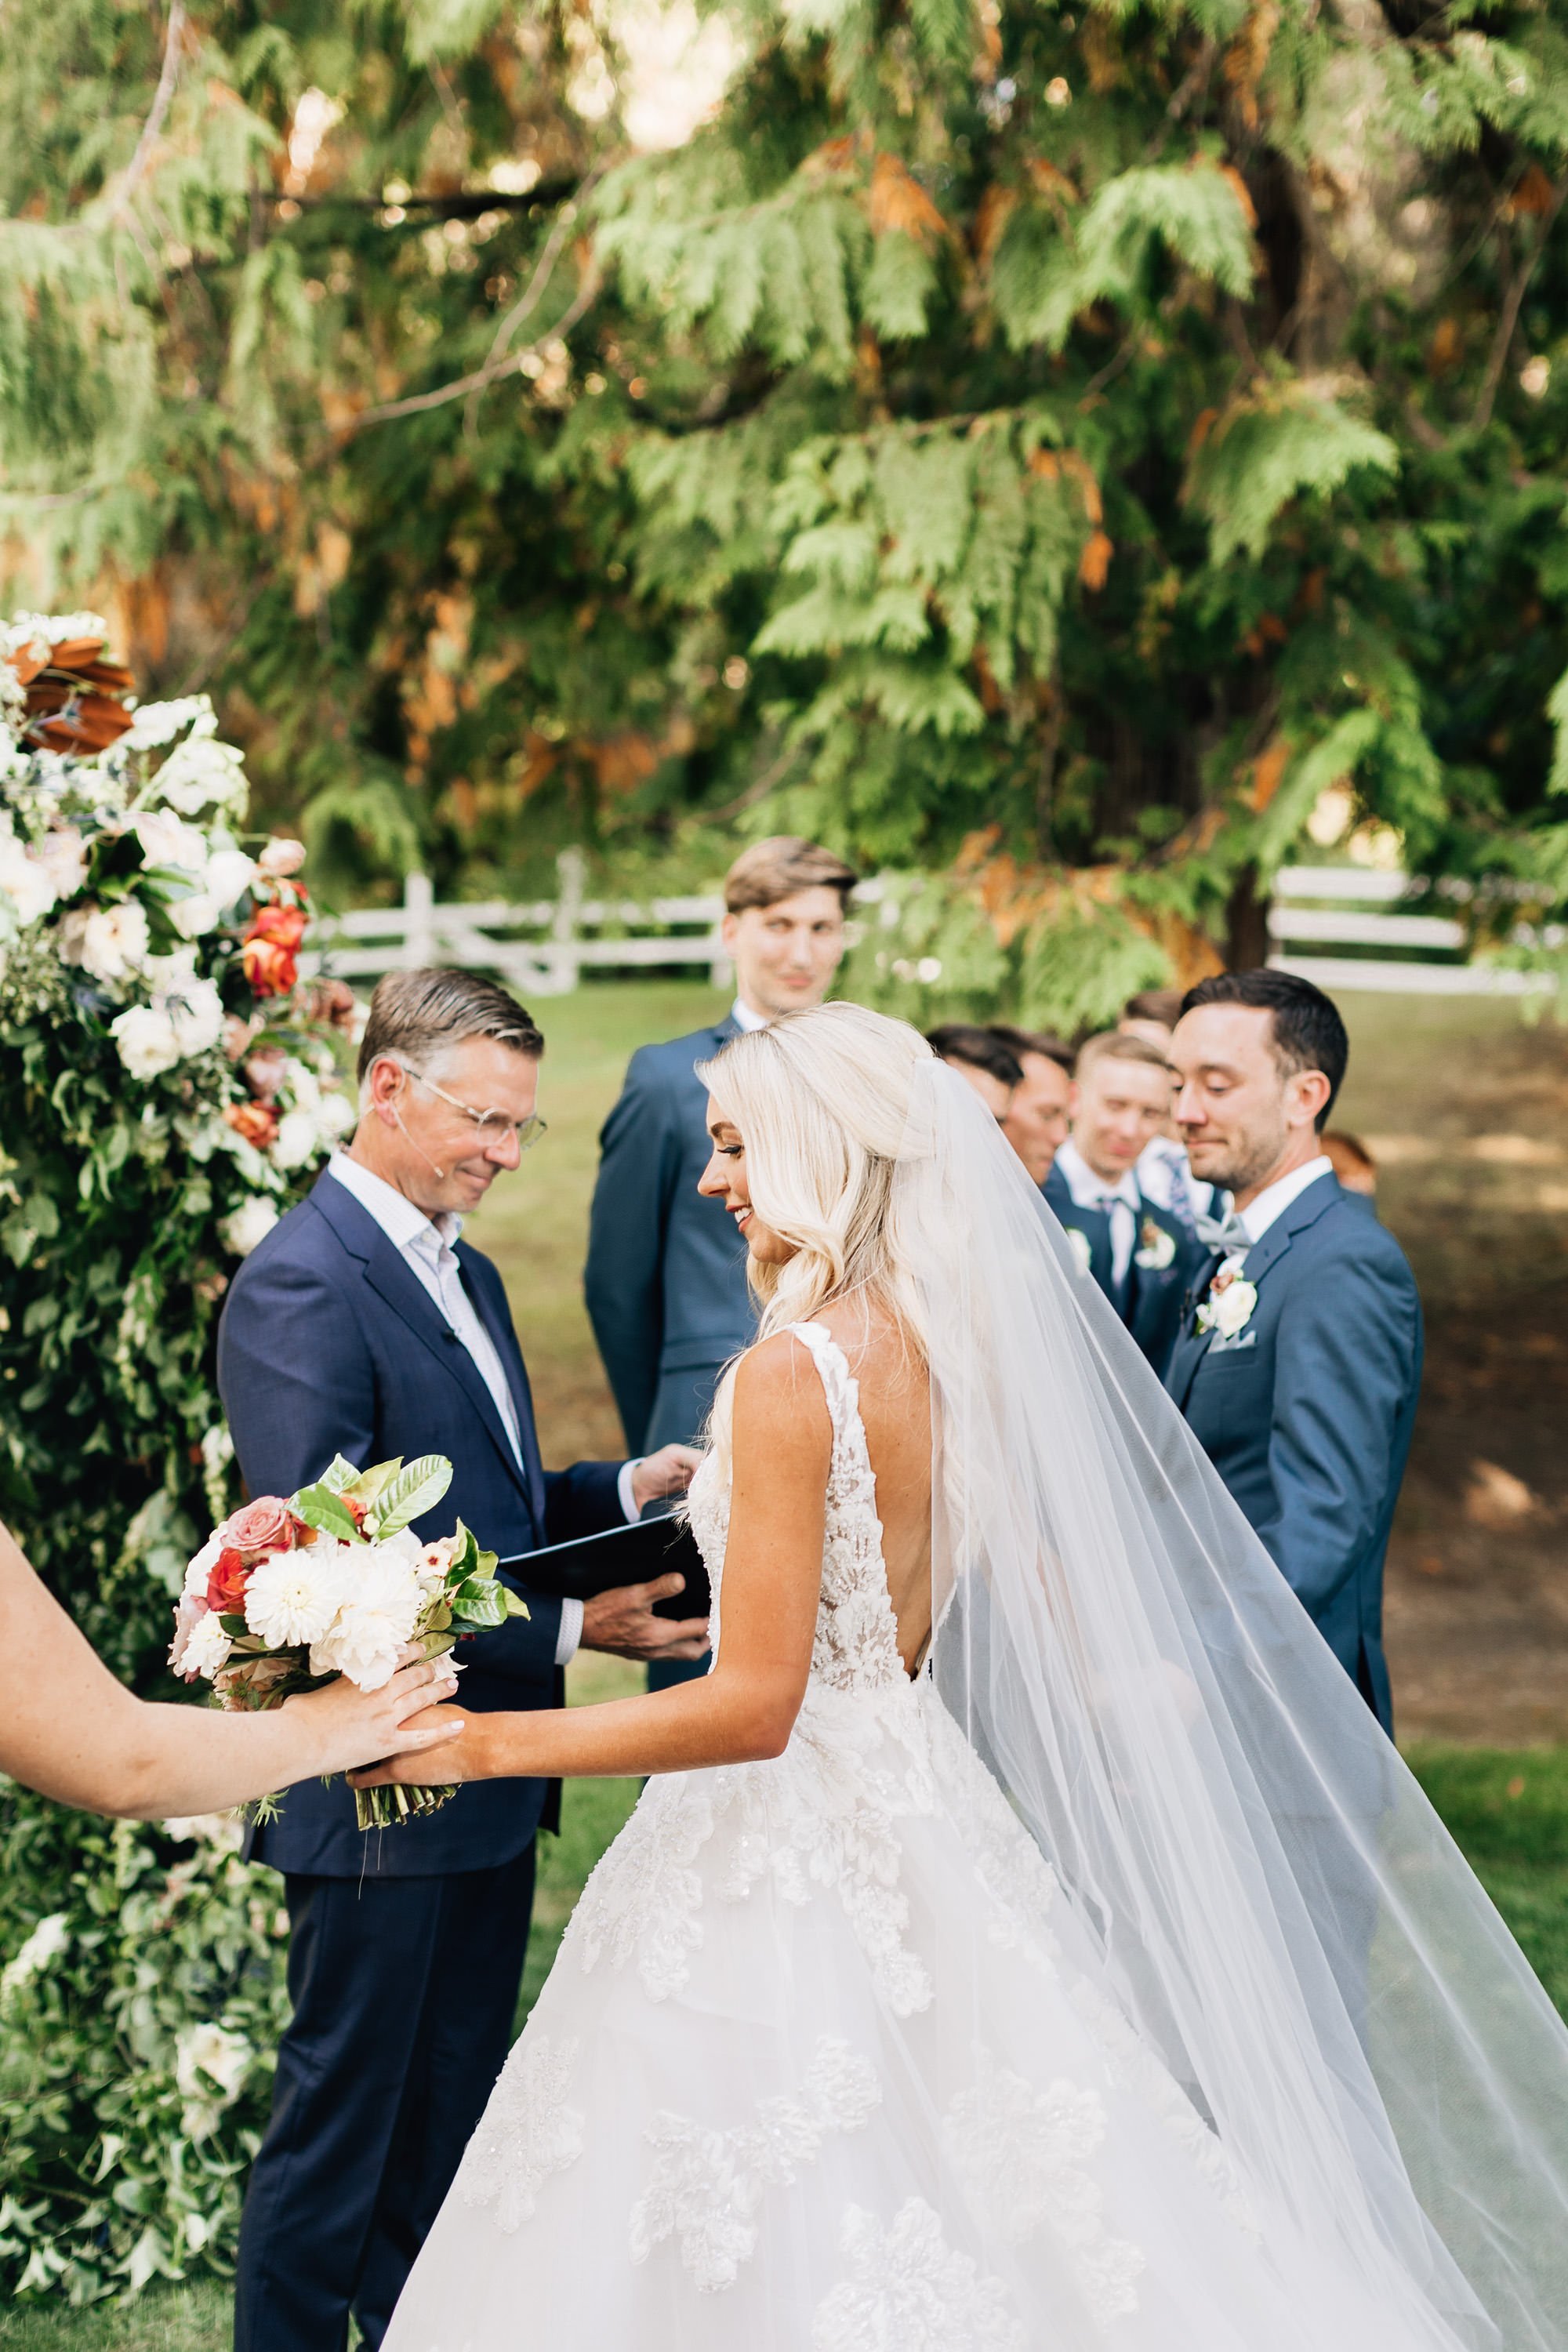 pacific-engagements-wedding-ceremony-chateau-lill-wedding-venue-woodinville